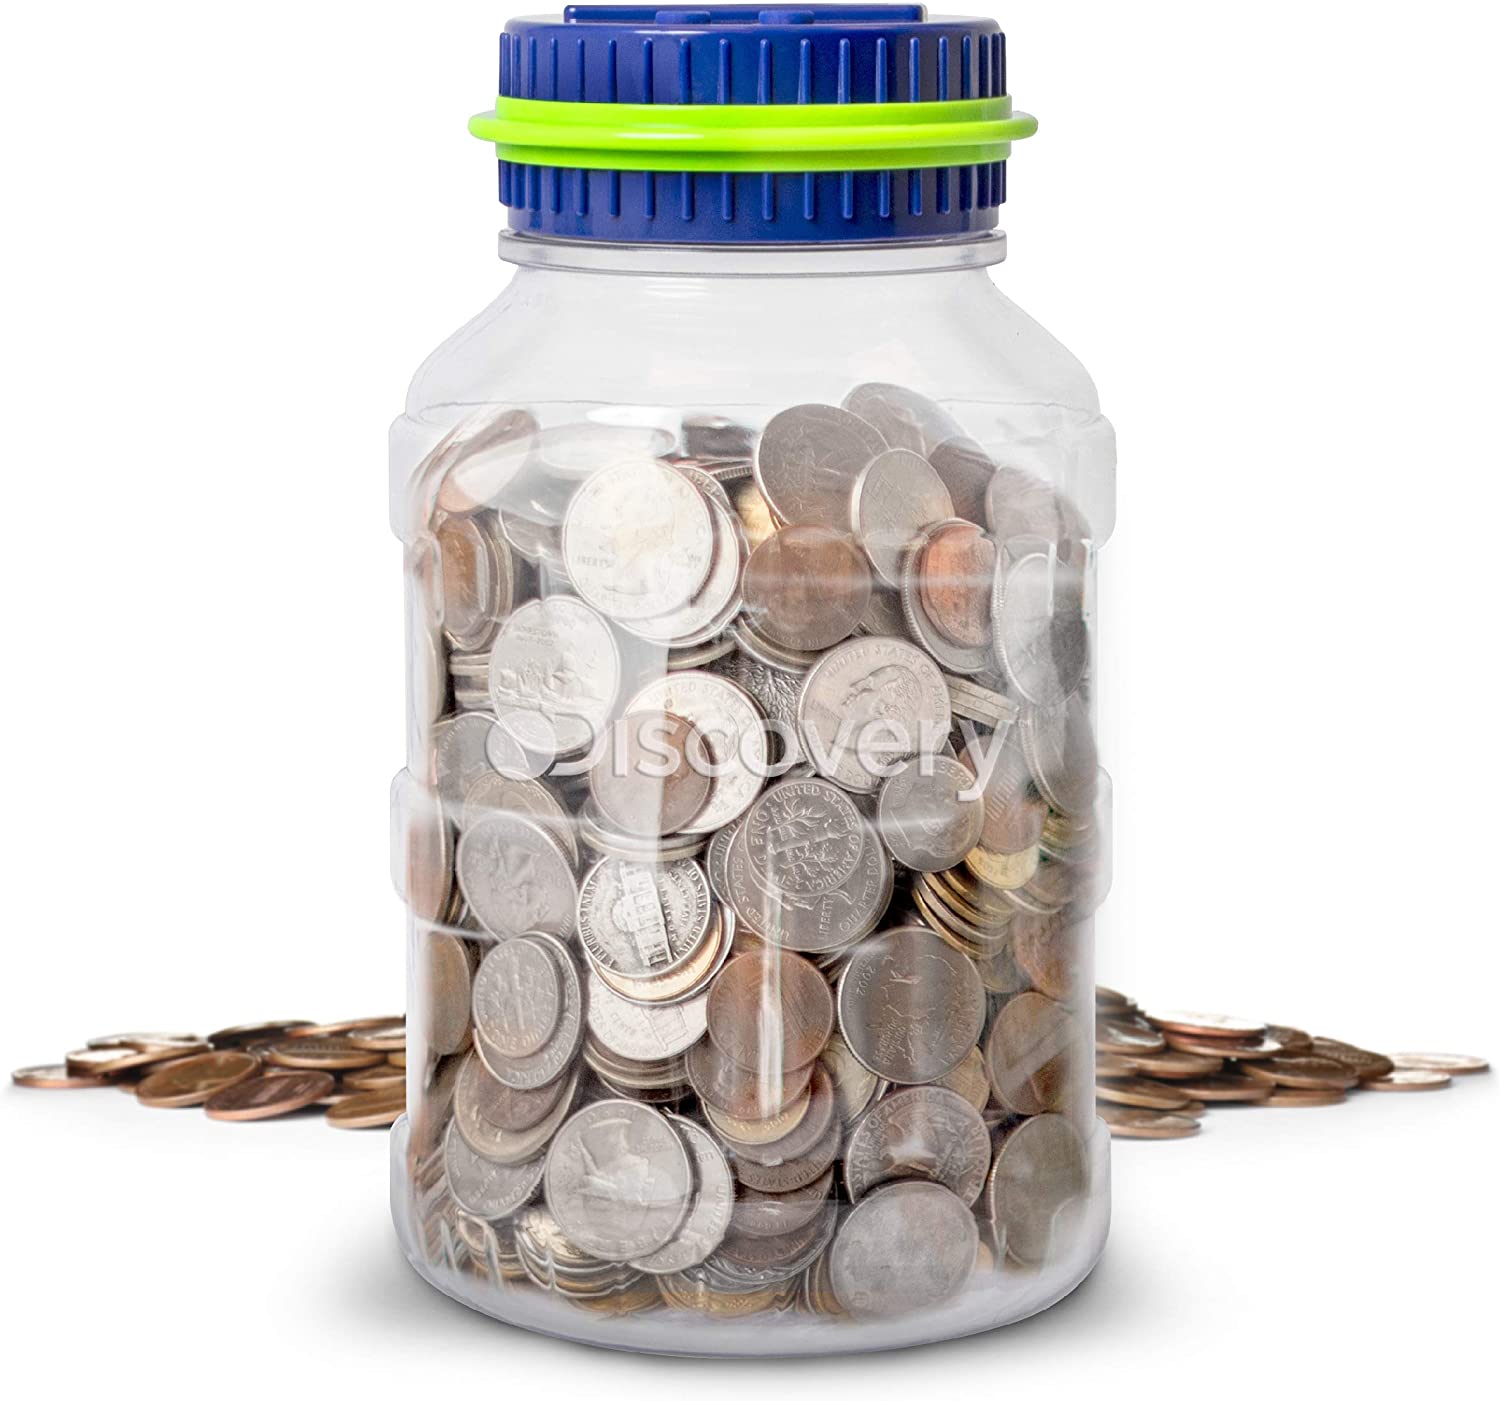 Tradewinds Coin Counting Jar with Digital LCD Display 